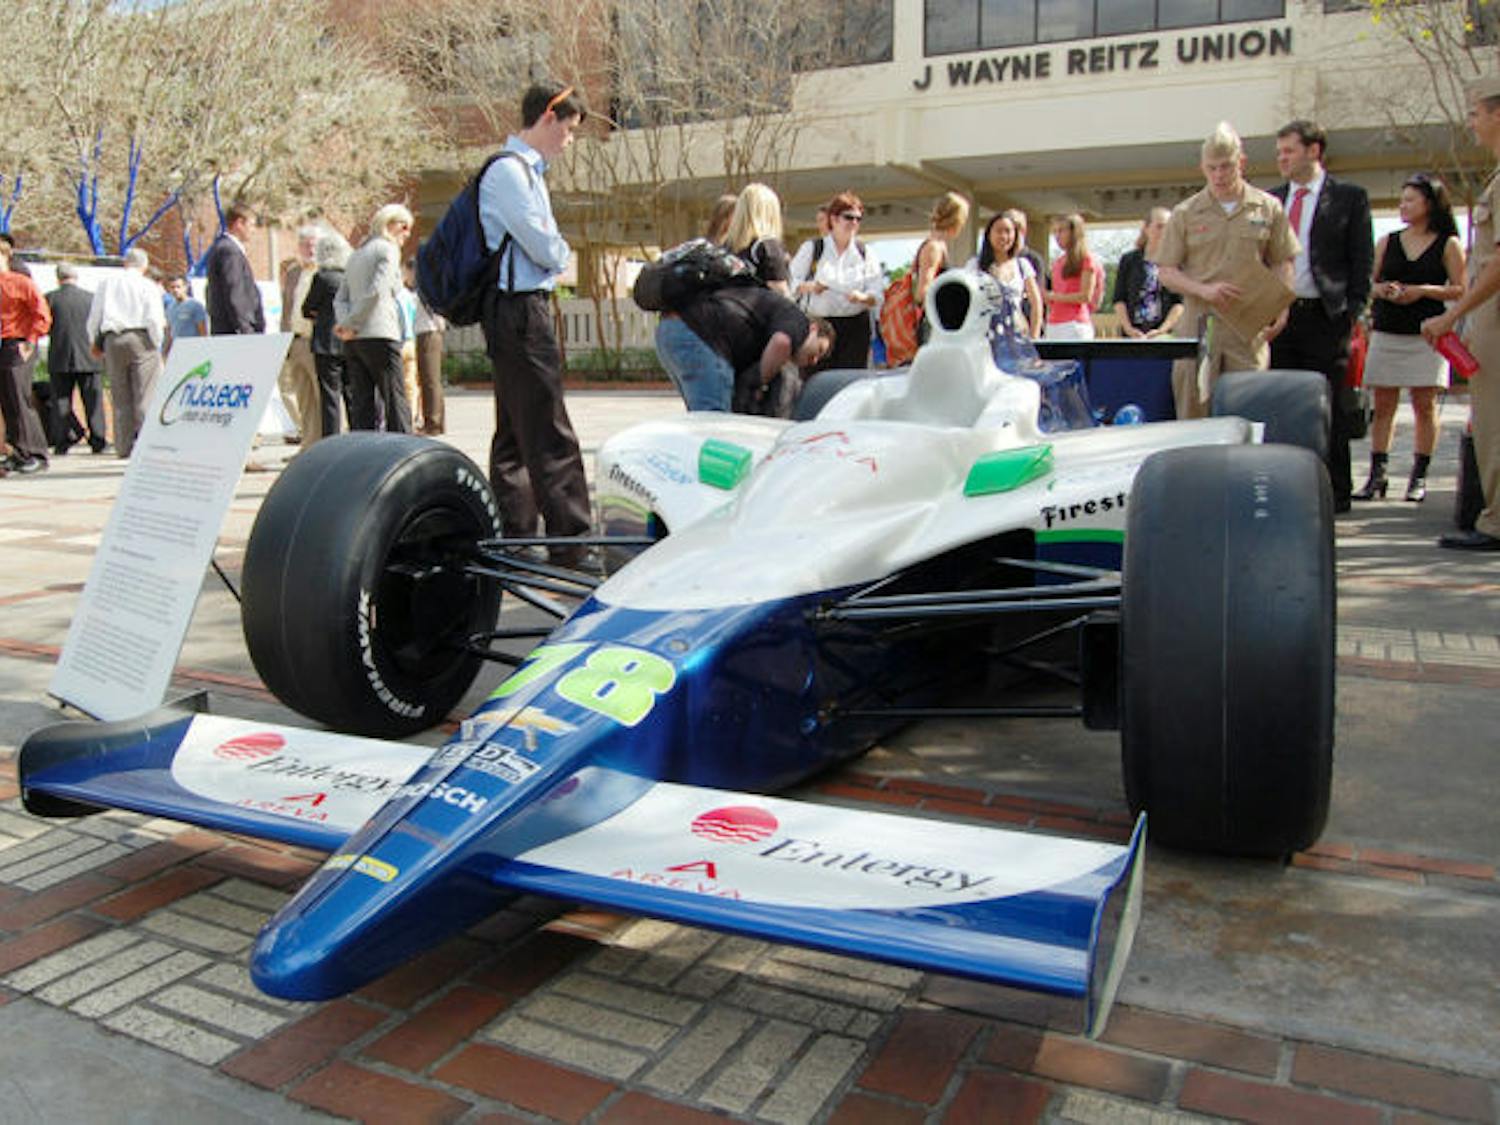 Passers-by gaze at the Nuclear Clean Air Energy car driven by IZOD IndyCar racer Simona De Silvestro, 24, displayed Tuesday afternoon on the Reitz Union North Lawn as part of KV Racing Technology and Entergy Nuclear teaming up to promote the "Nuclear Clean Air Energy" public awareness program.